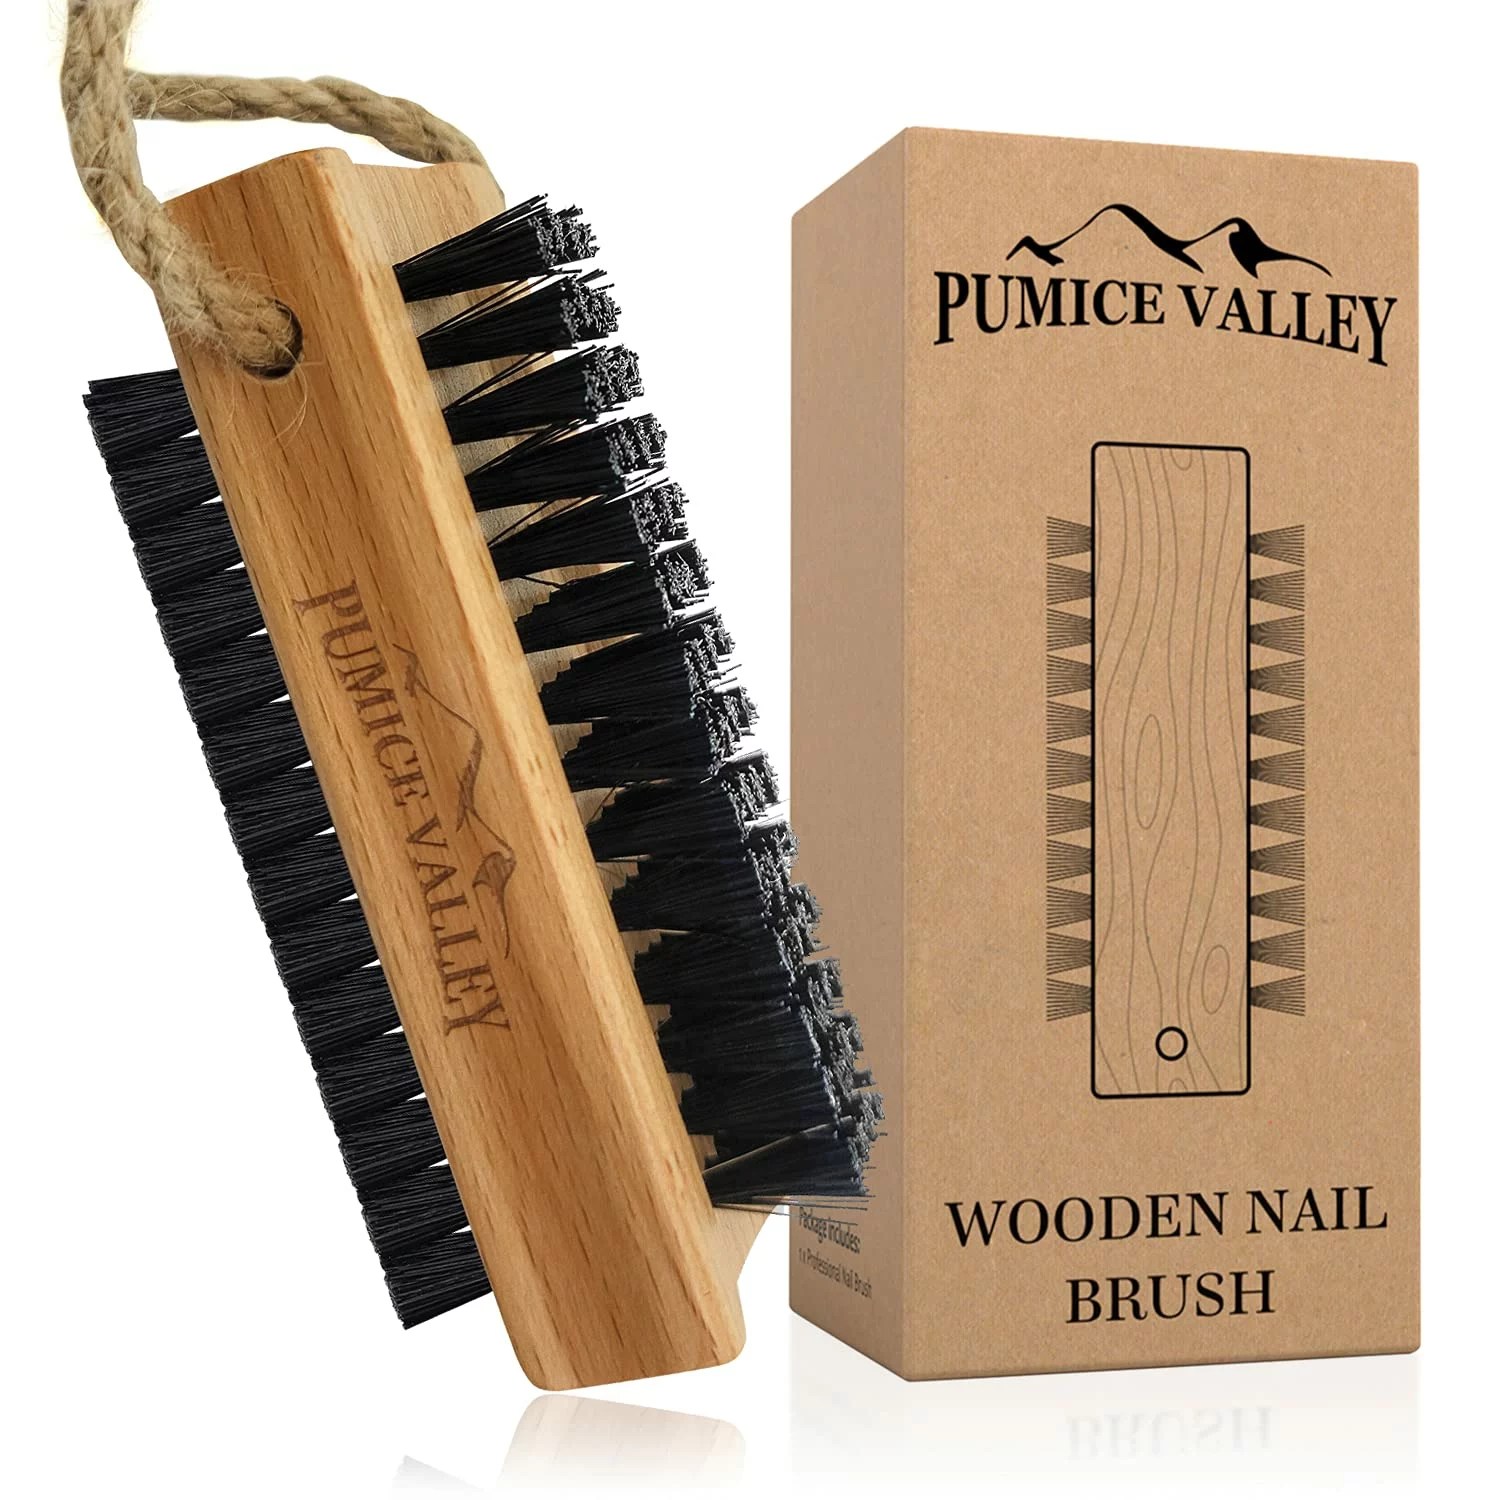 Pumice Valley Wooden Nail Brush